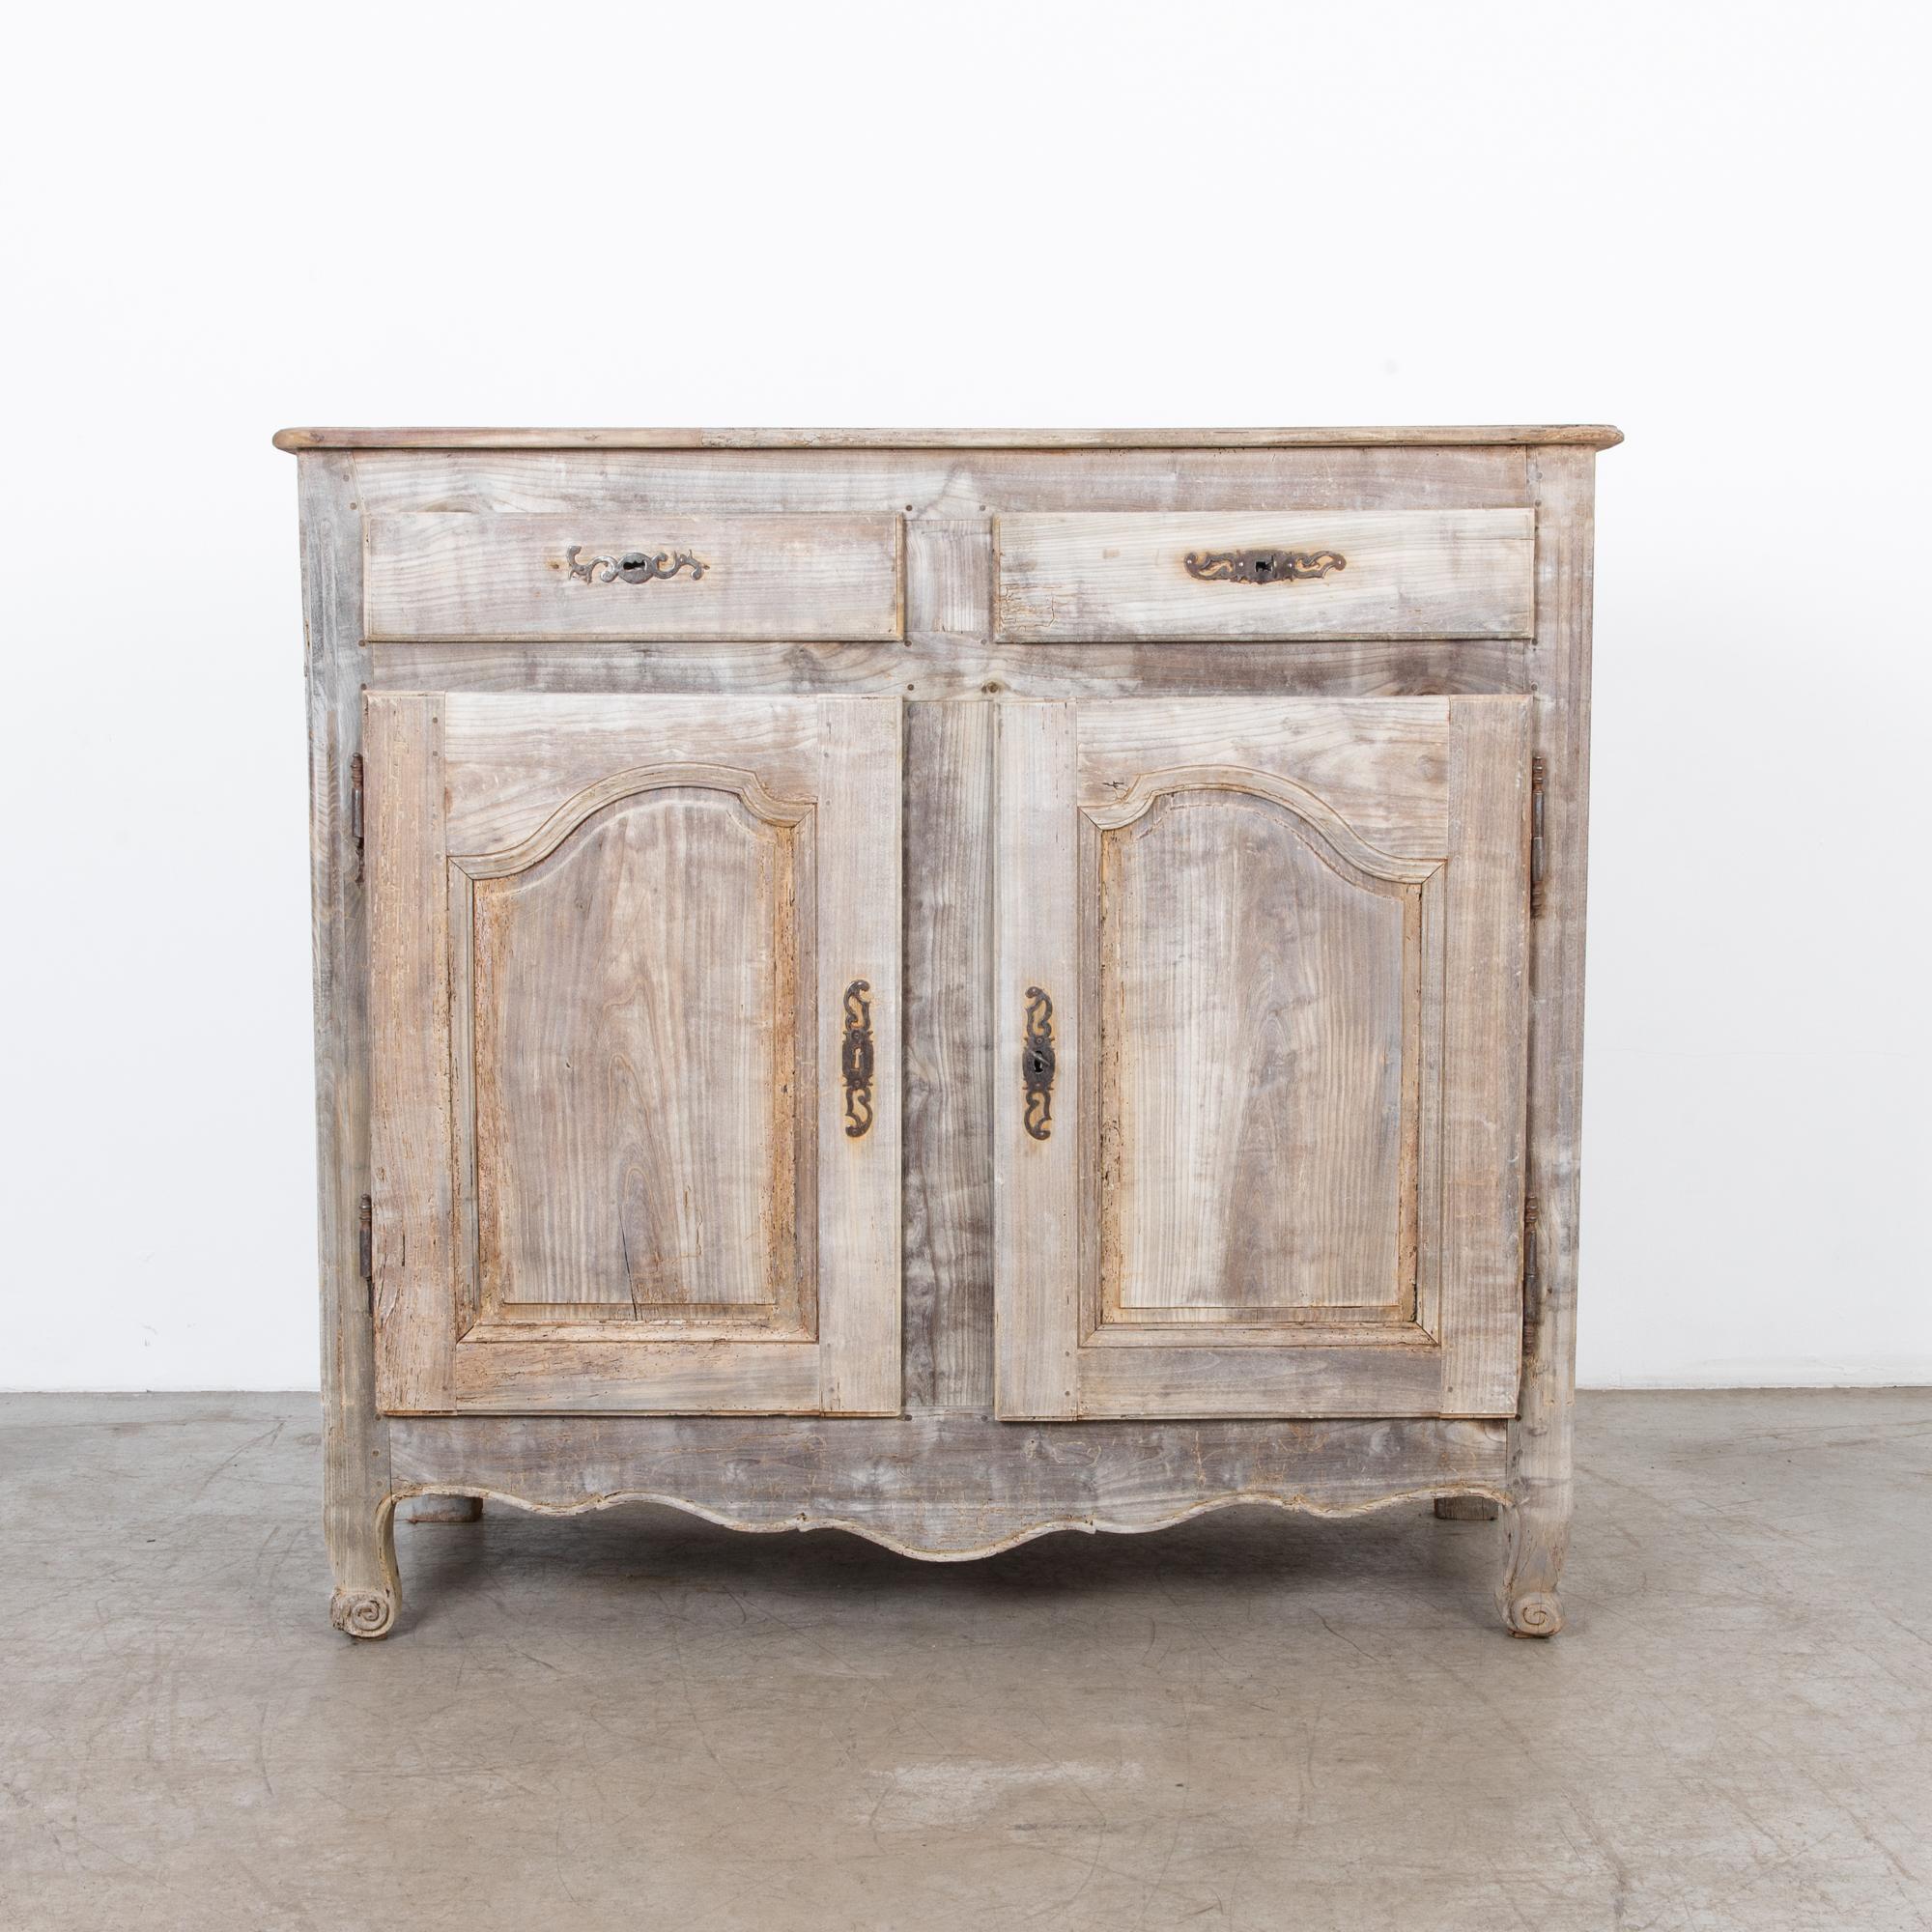 From late 18th century France, a two-door and drawer cabinet in elmwood. A distinctly country style approach typifies the casual yet refined aesthetic of the French countryside. A beautiful rustic finish shows evidence of wear, the seasoning of time